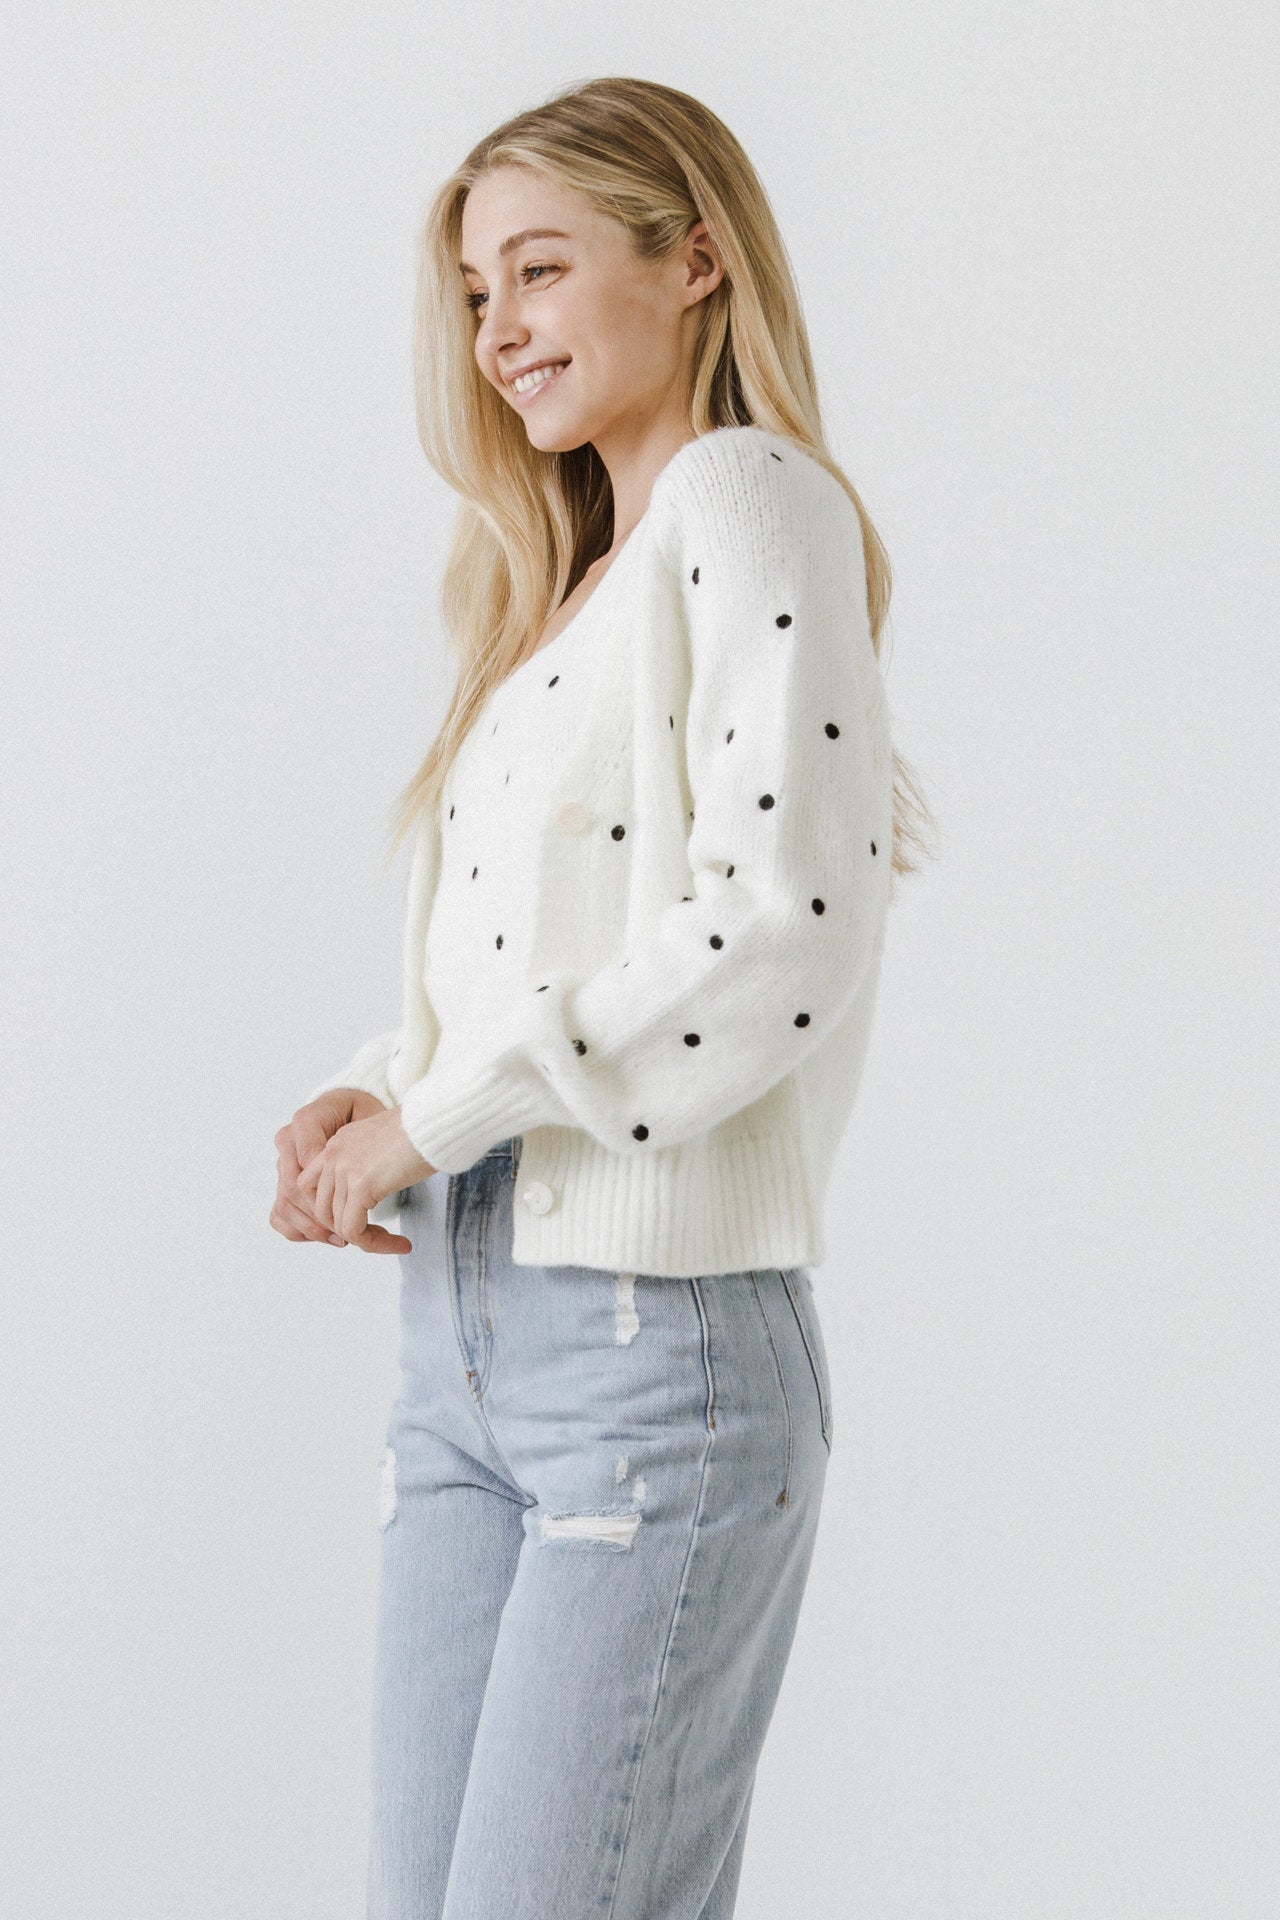 ENGLISH FACTORY - Dot Embroidered Cardigan - CARDIGANS available at Objectrare